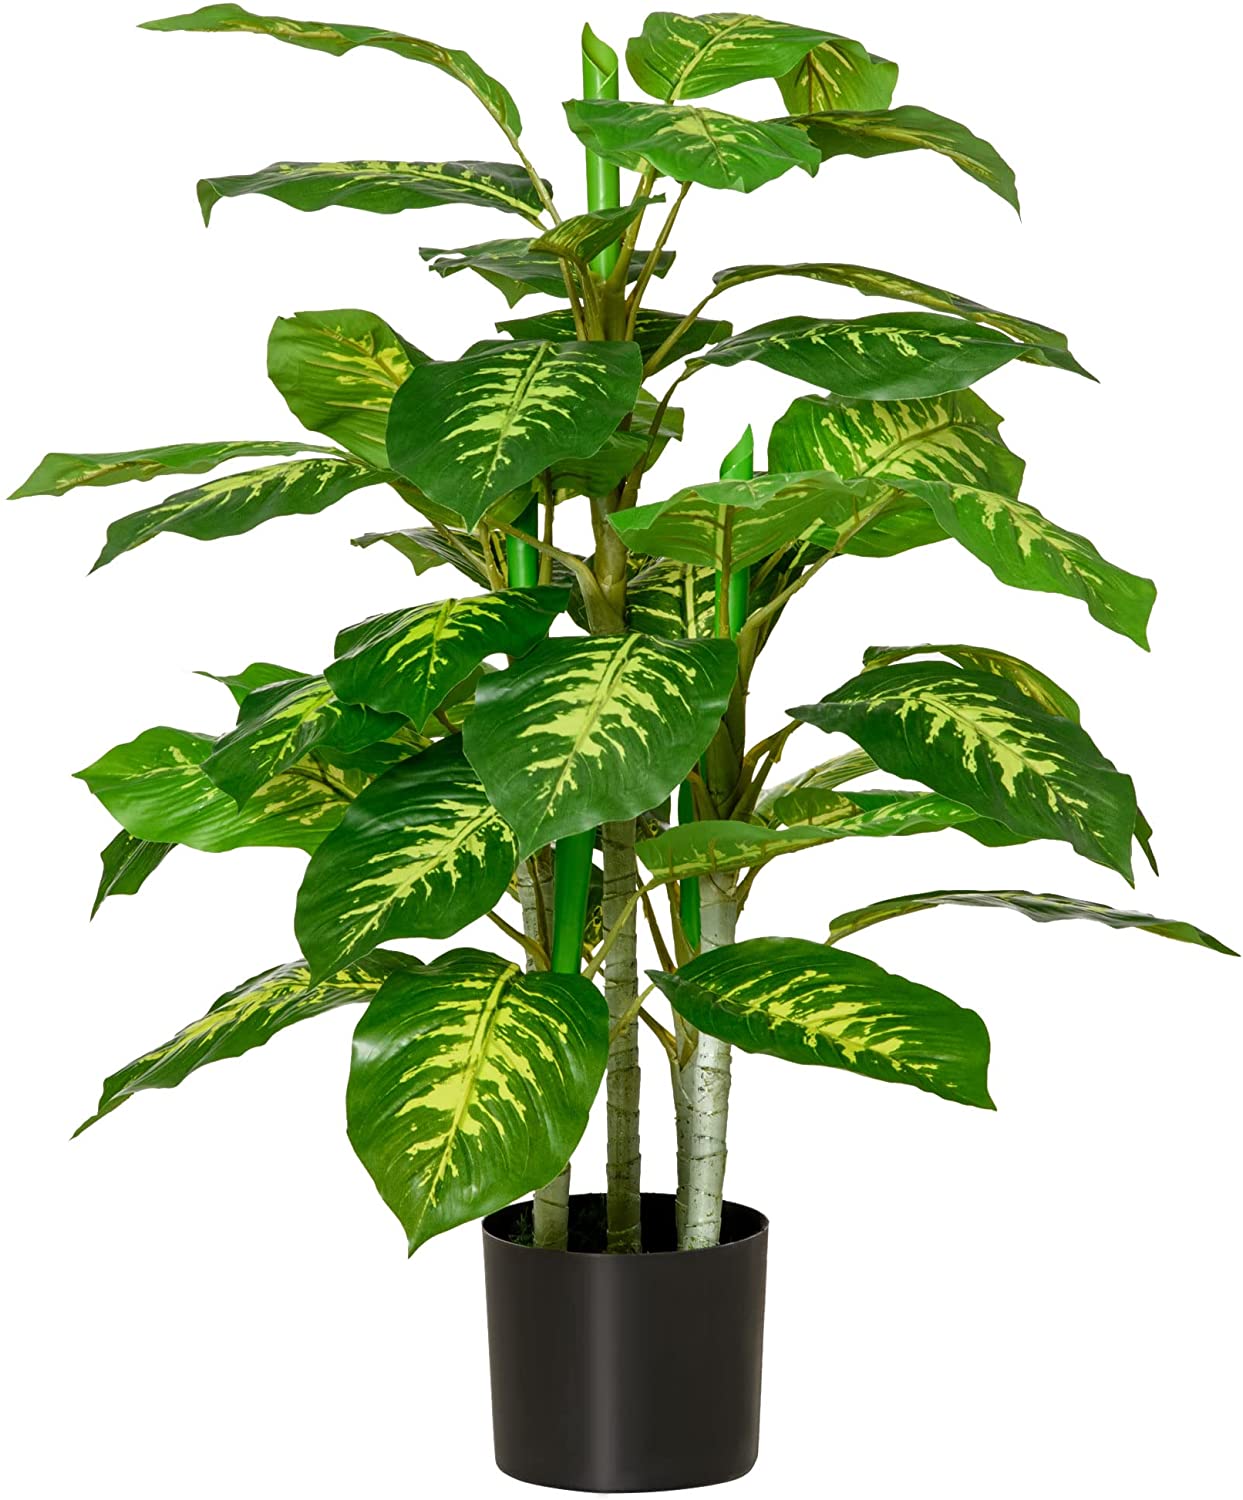 HOMCOM Artificial Evergreen Plant Realistic Fake Tree Potted Home Office Décor 95cm